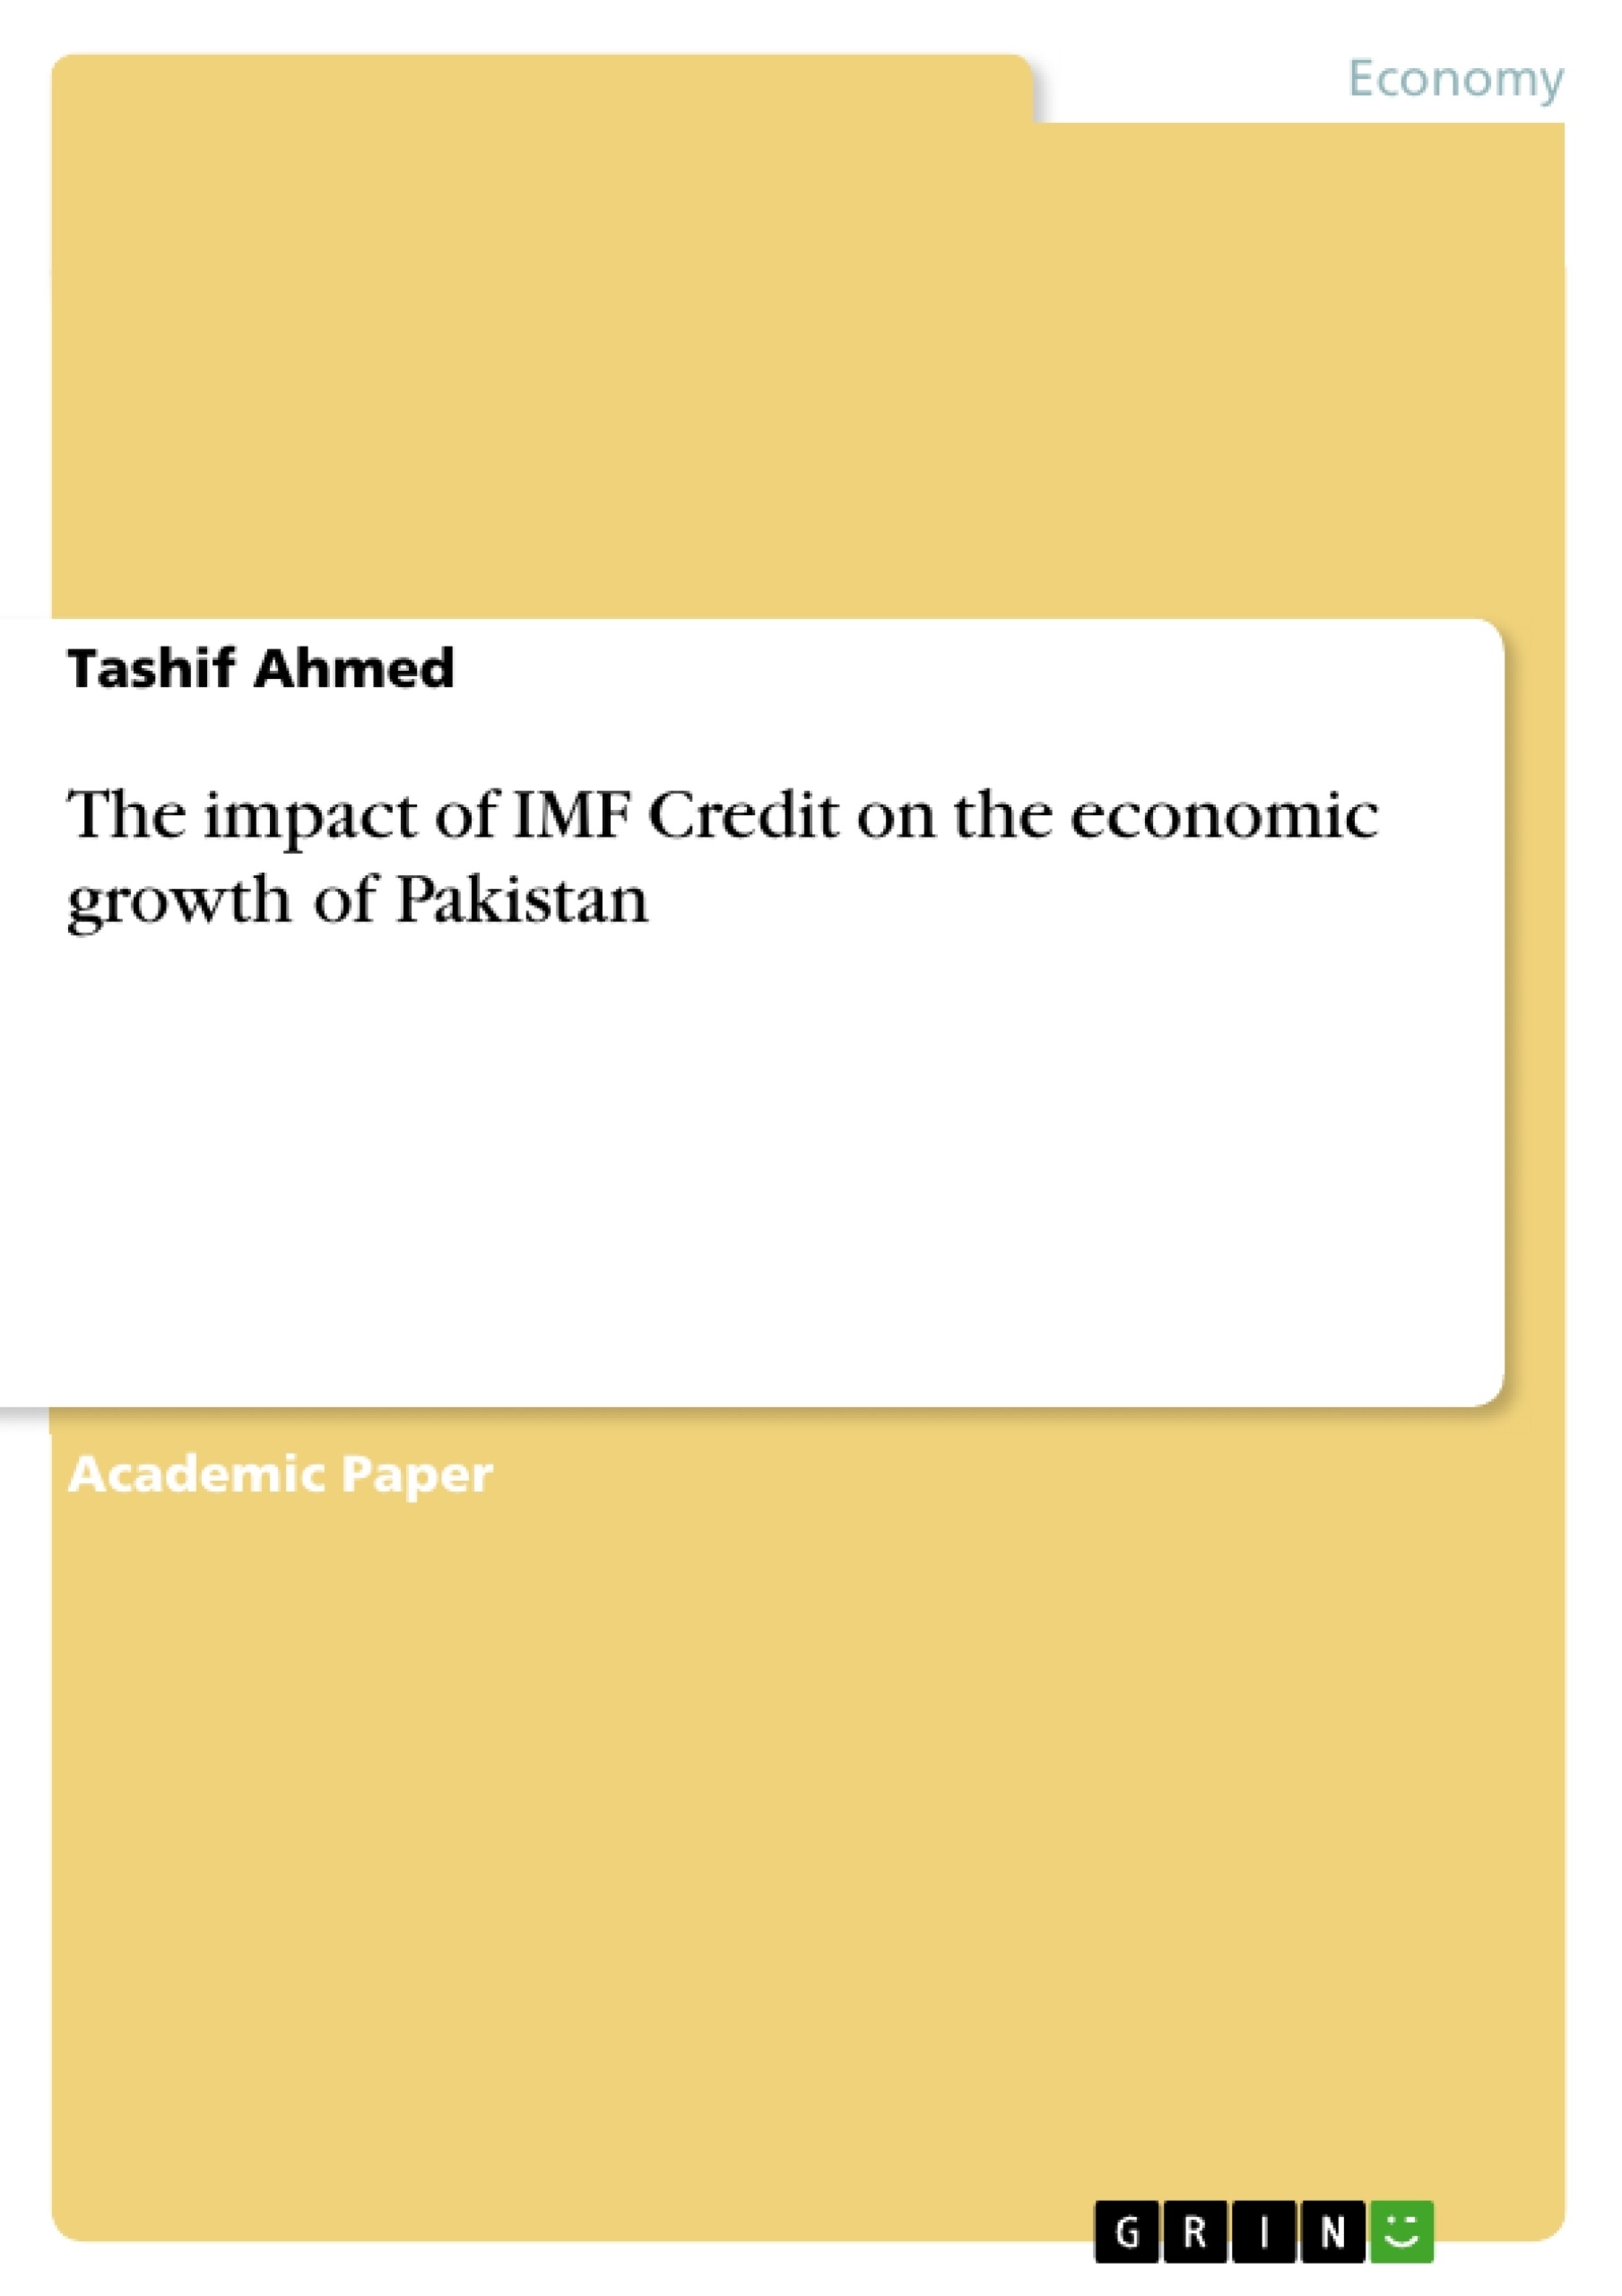 Title: The impact of IMF Credit on the economic growth of Pakistan